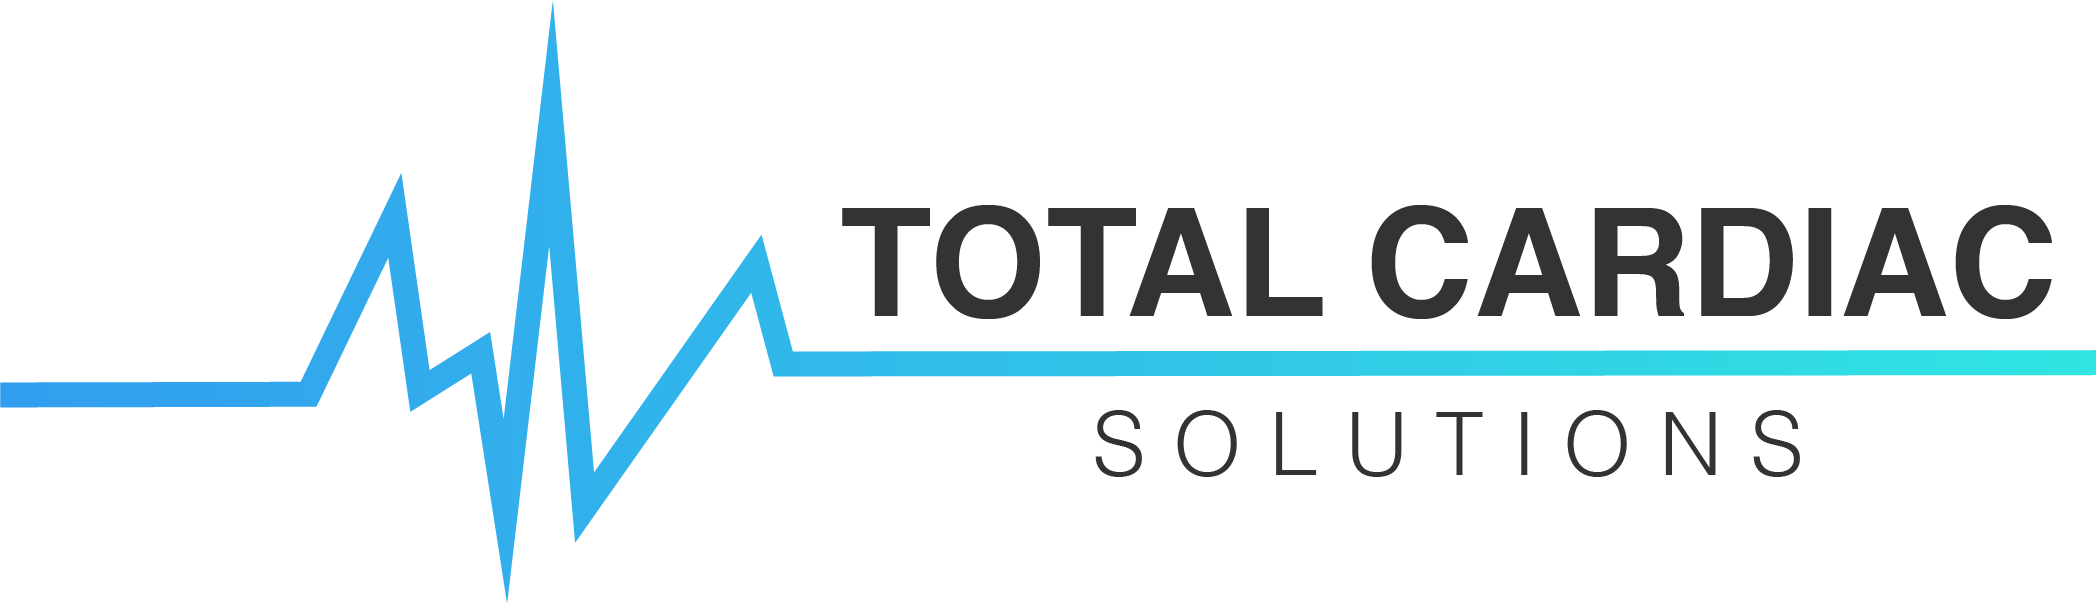 Total Cardiac Solutions - Nationwide Staffing For Cardiologists By Cardiologists